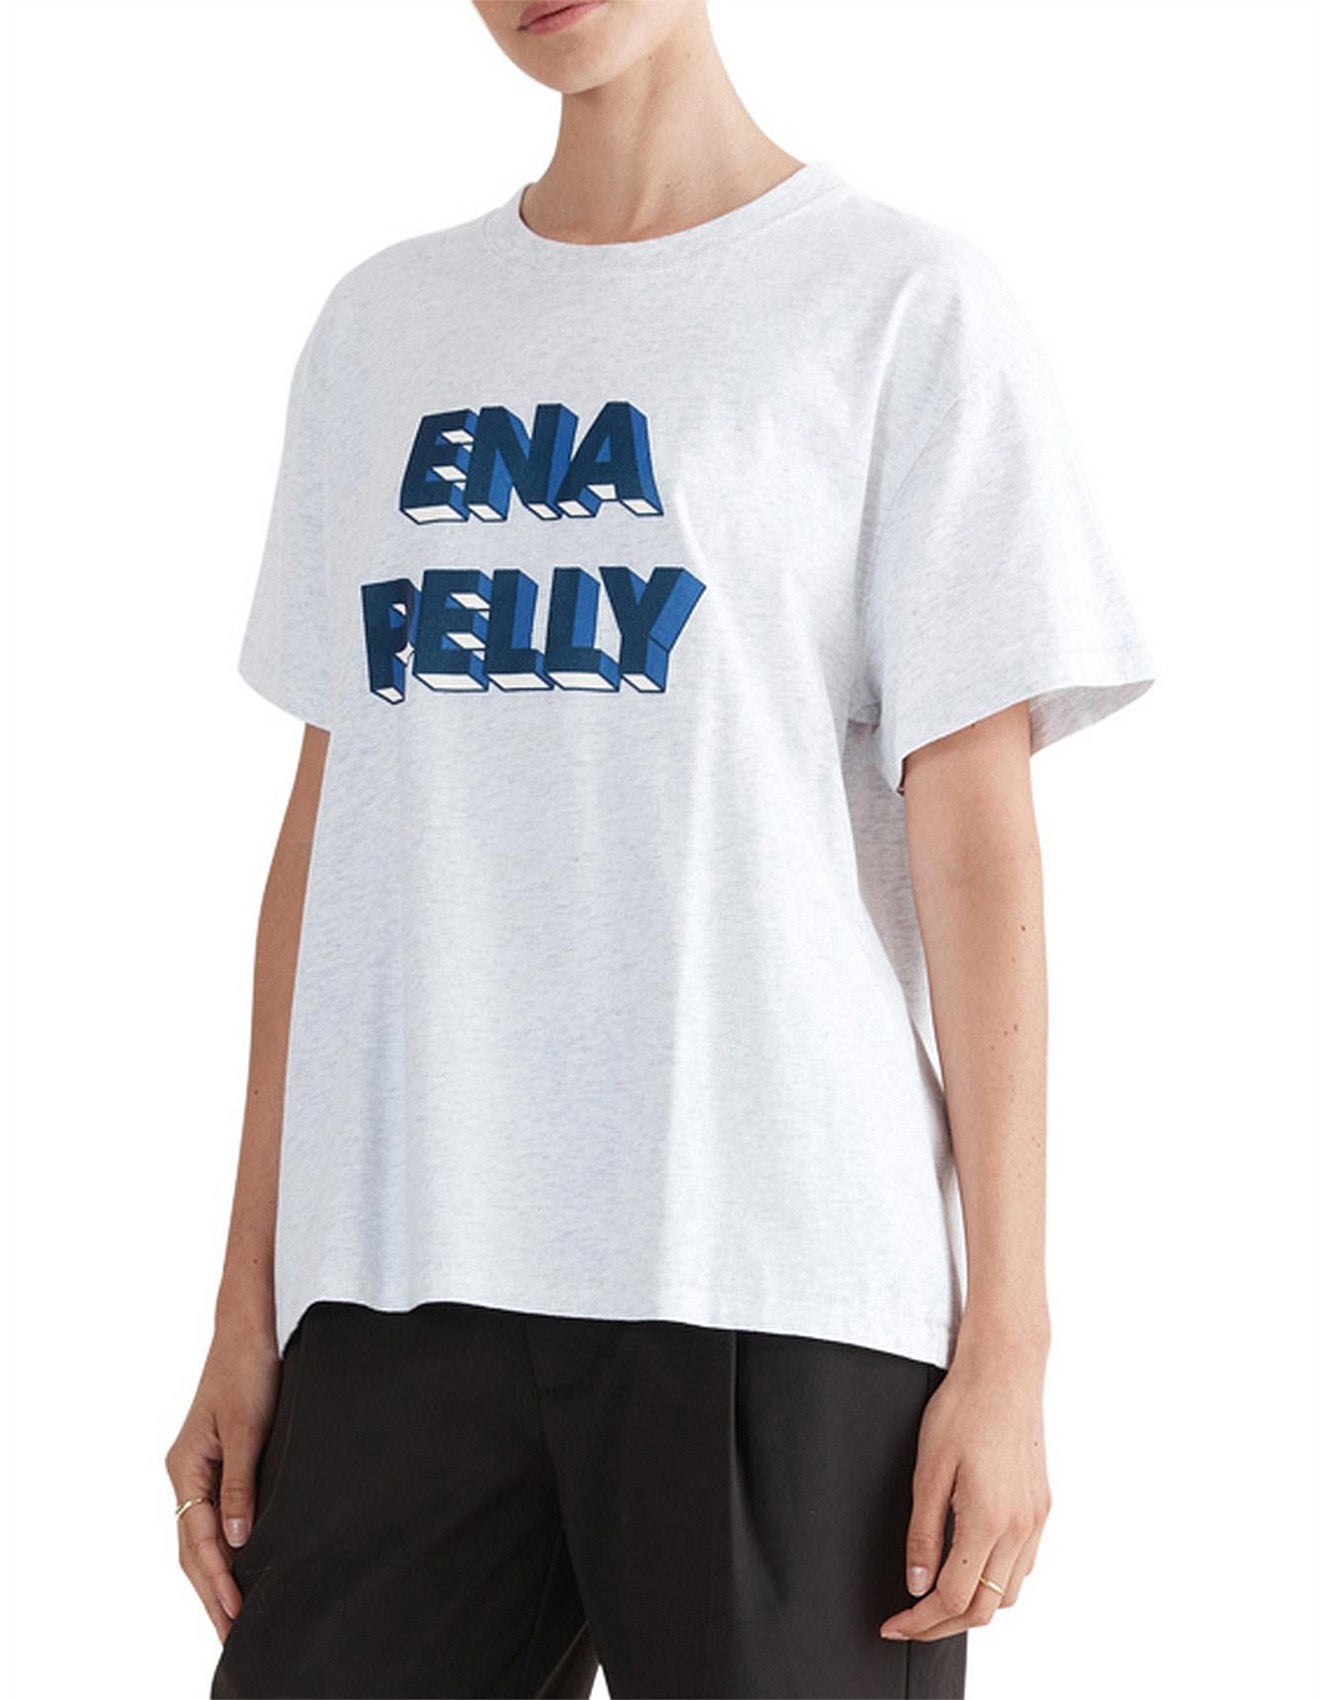 Crafted for comfort from a luxurious recycled cotton blend fabrication, the 3D Logo Relaxed Tee by Ena Pelly is the perfect addition to your wardrobe.